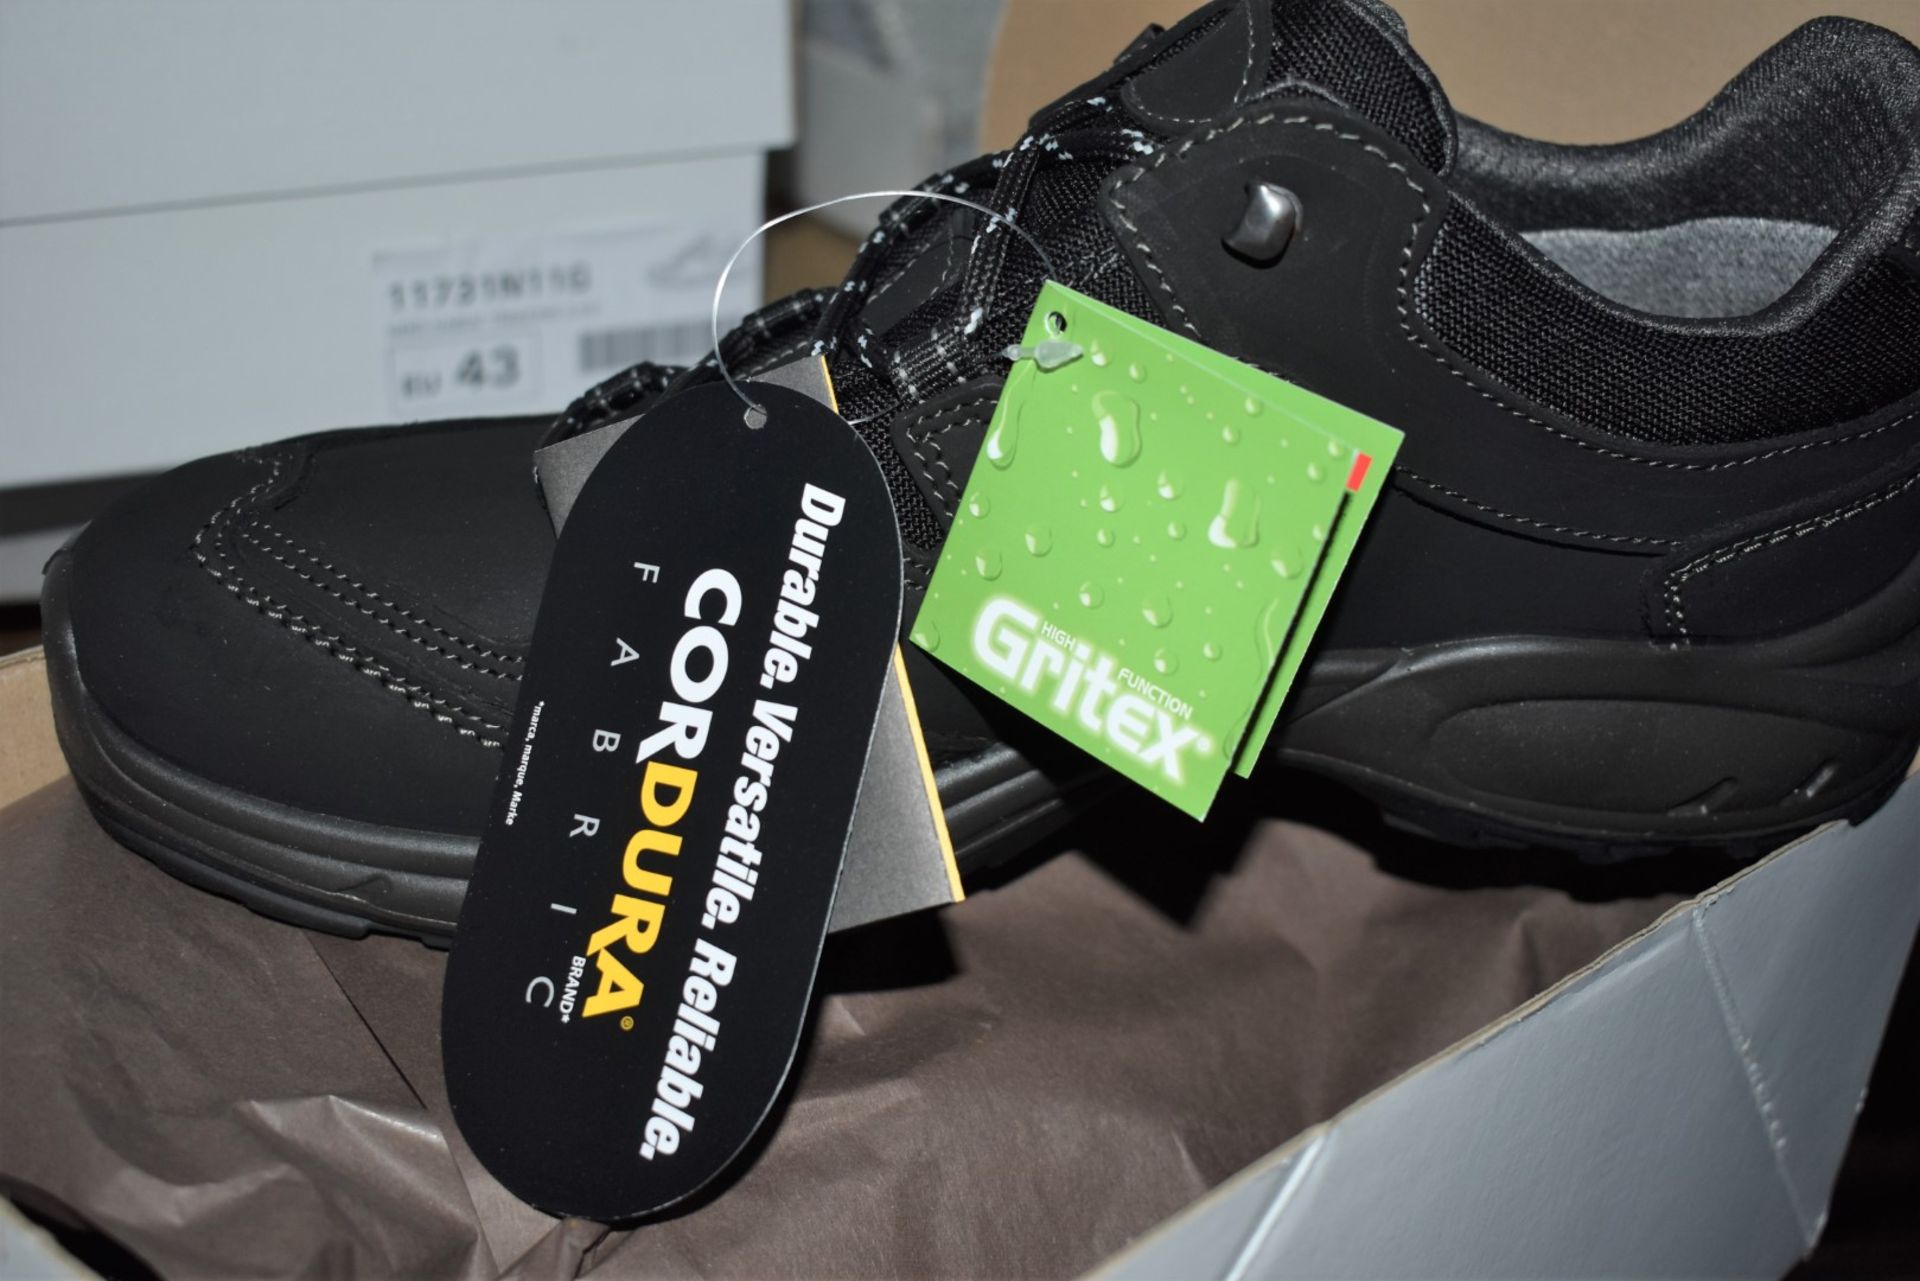 1 x Pair of Mens VIBRAM Walking Shoes - Outdoor GriTex Trekking Shoes With Cordura Fabric - Made - Image 3 of 4